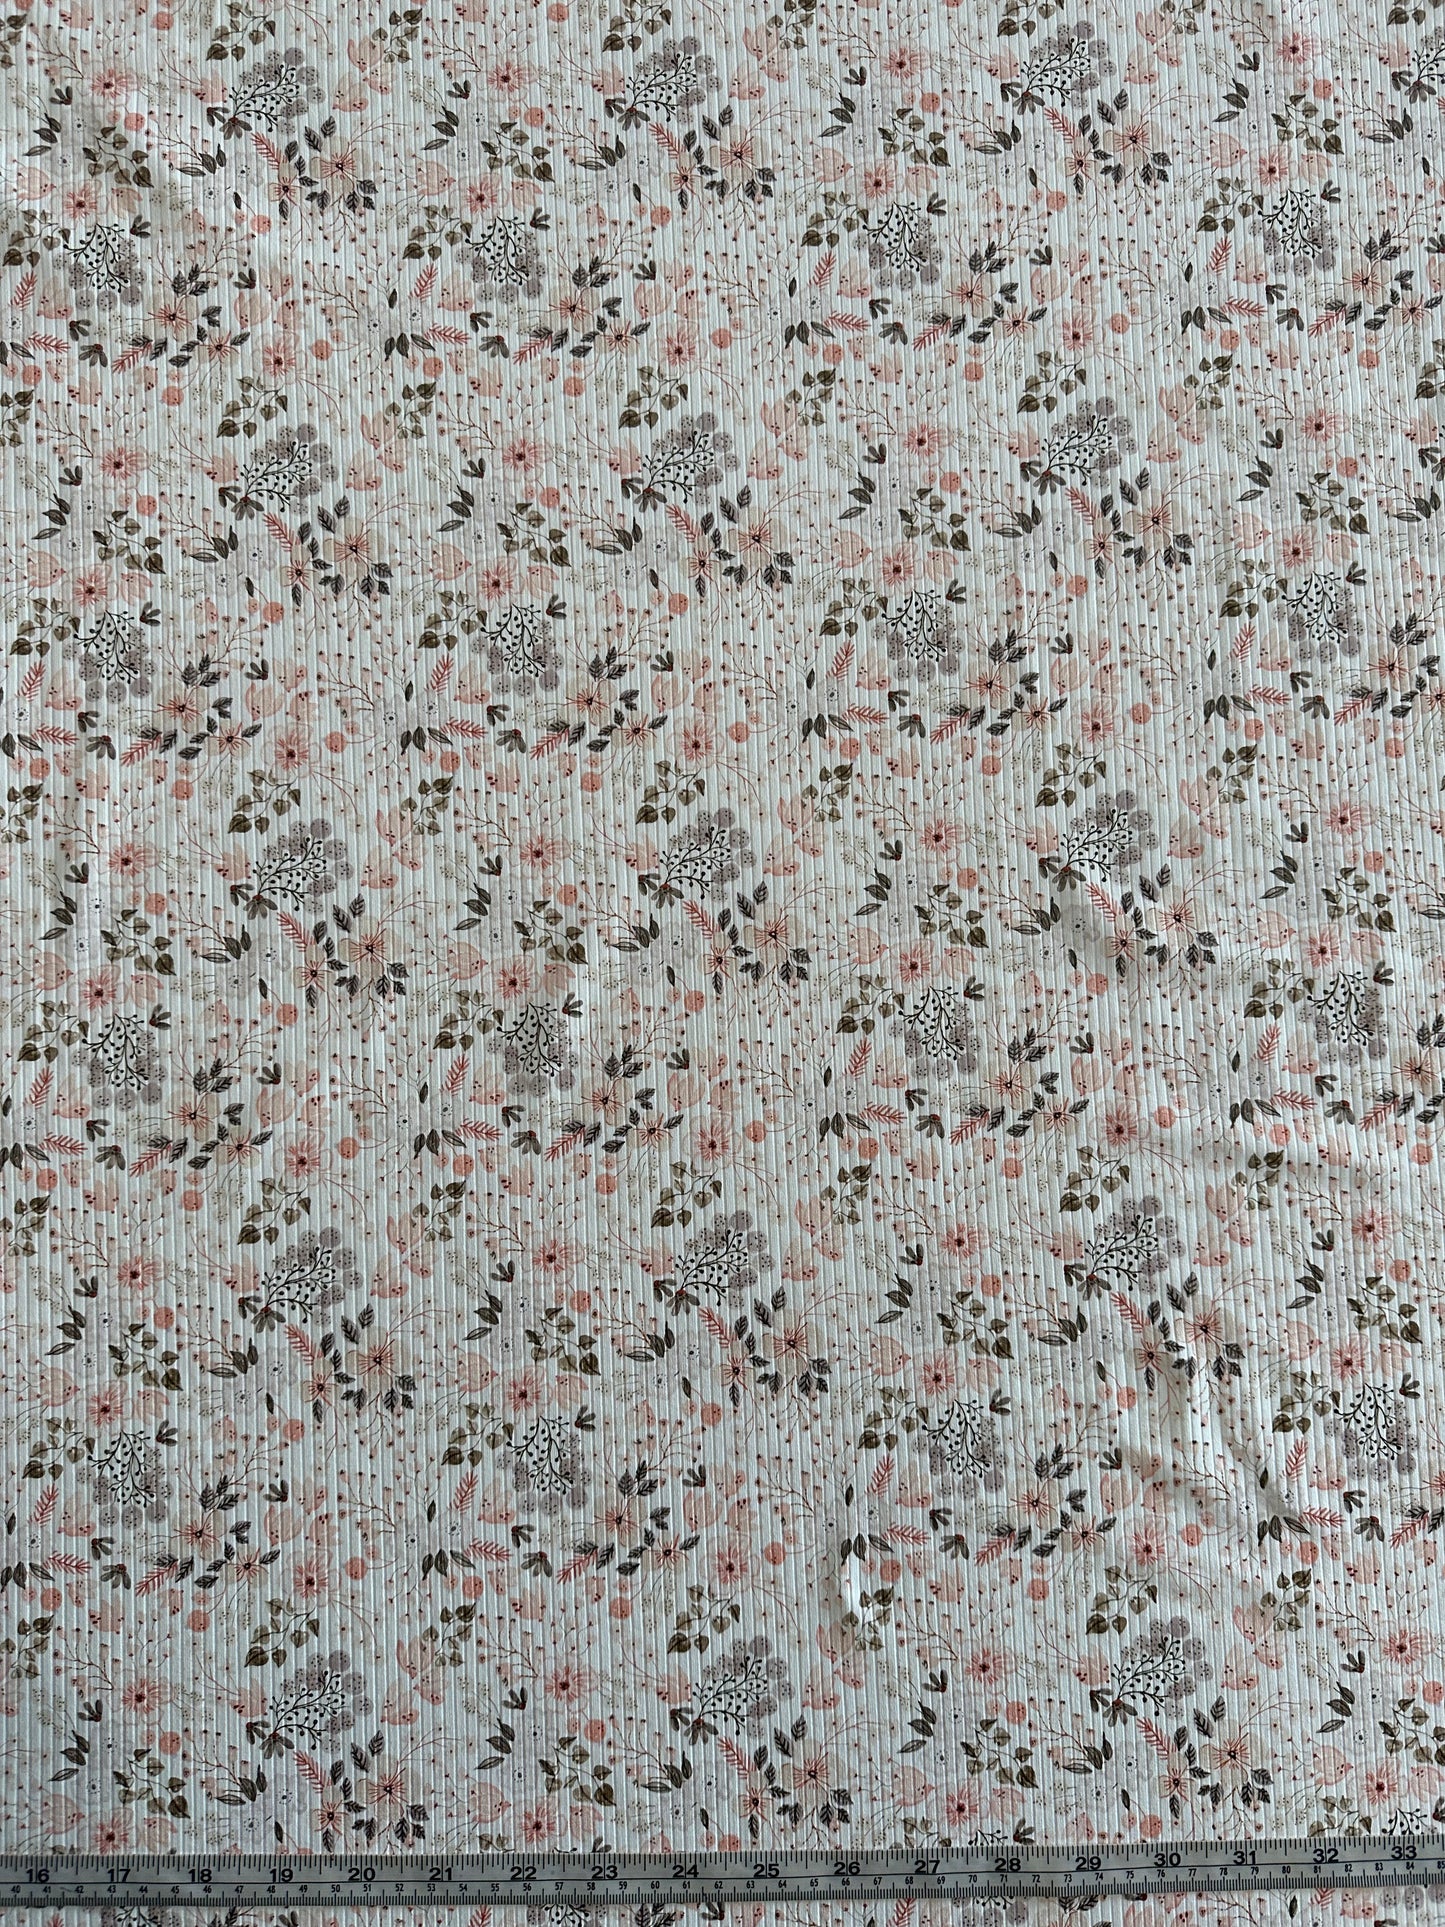 Brenna Floral in White on Unbrushed Rib Knit Fabric Sold by the 1/4 yard